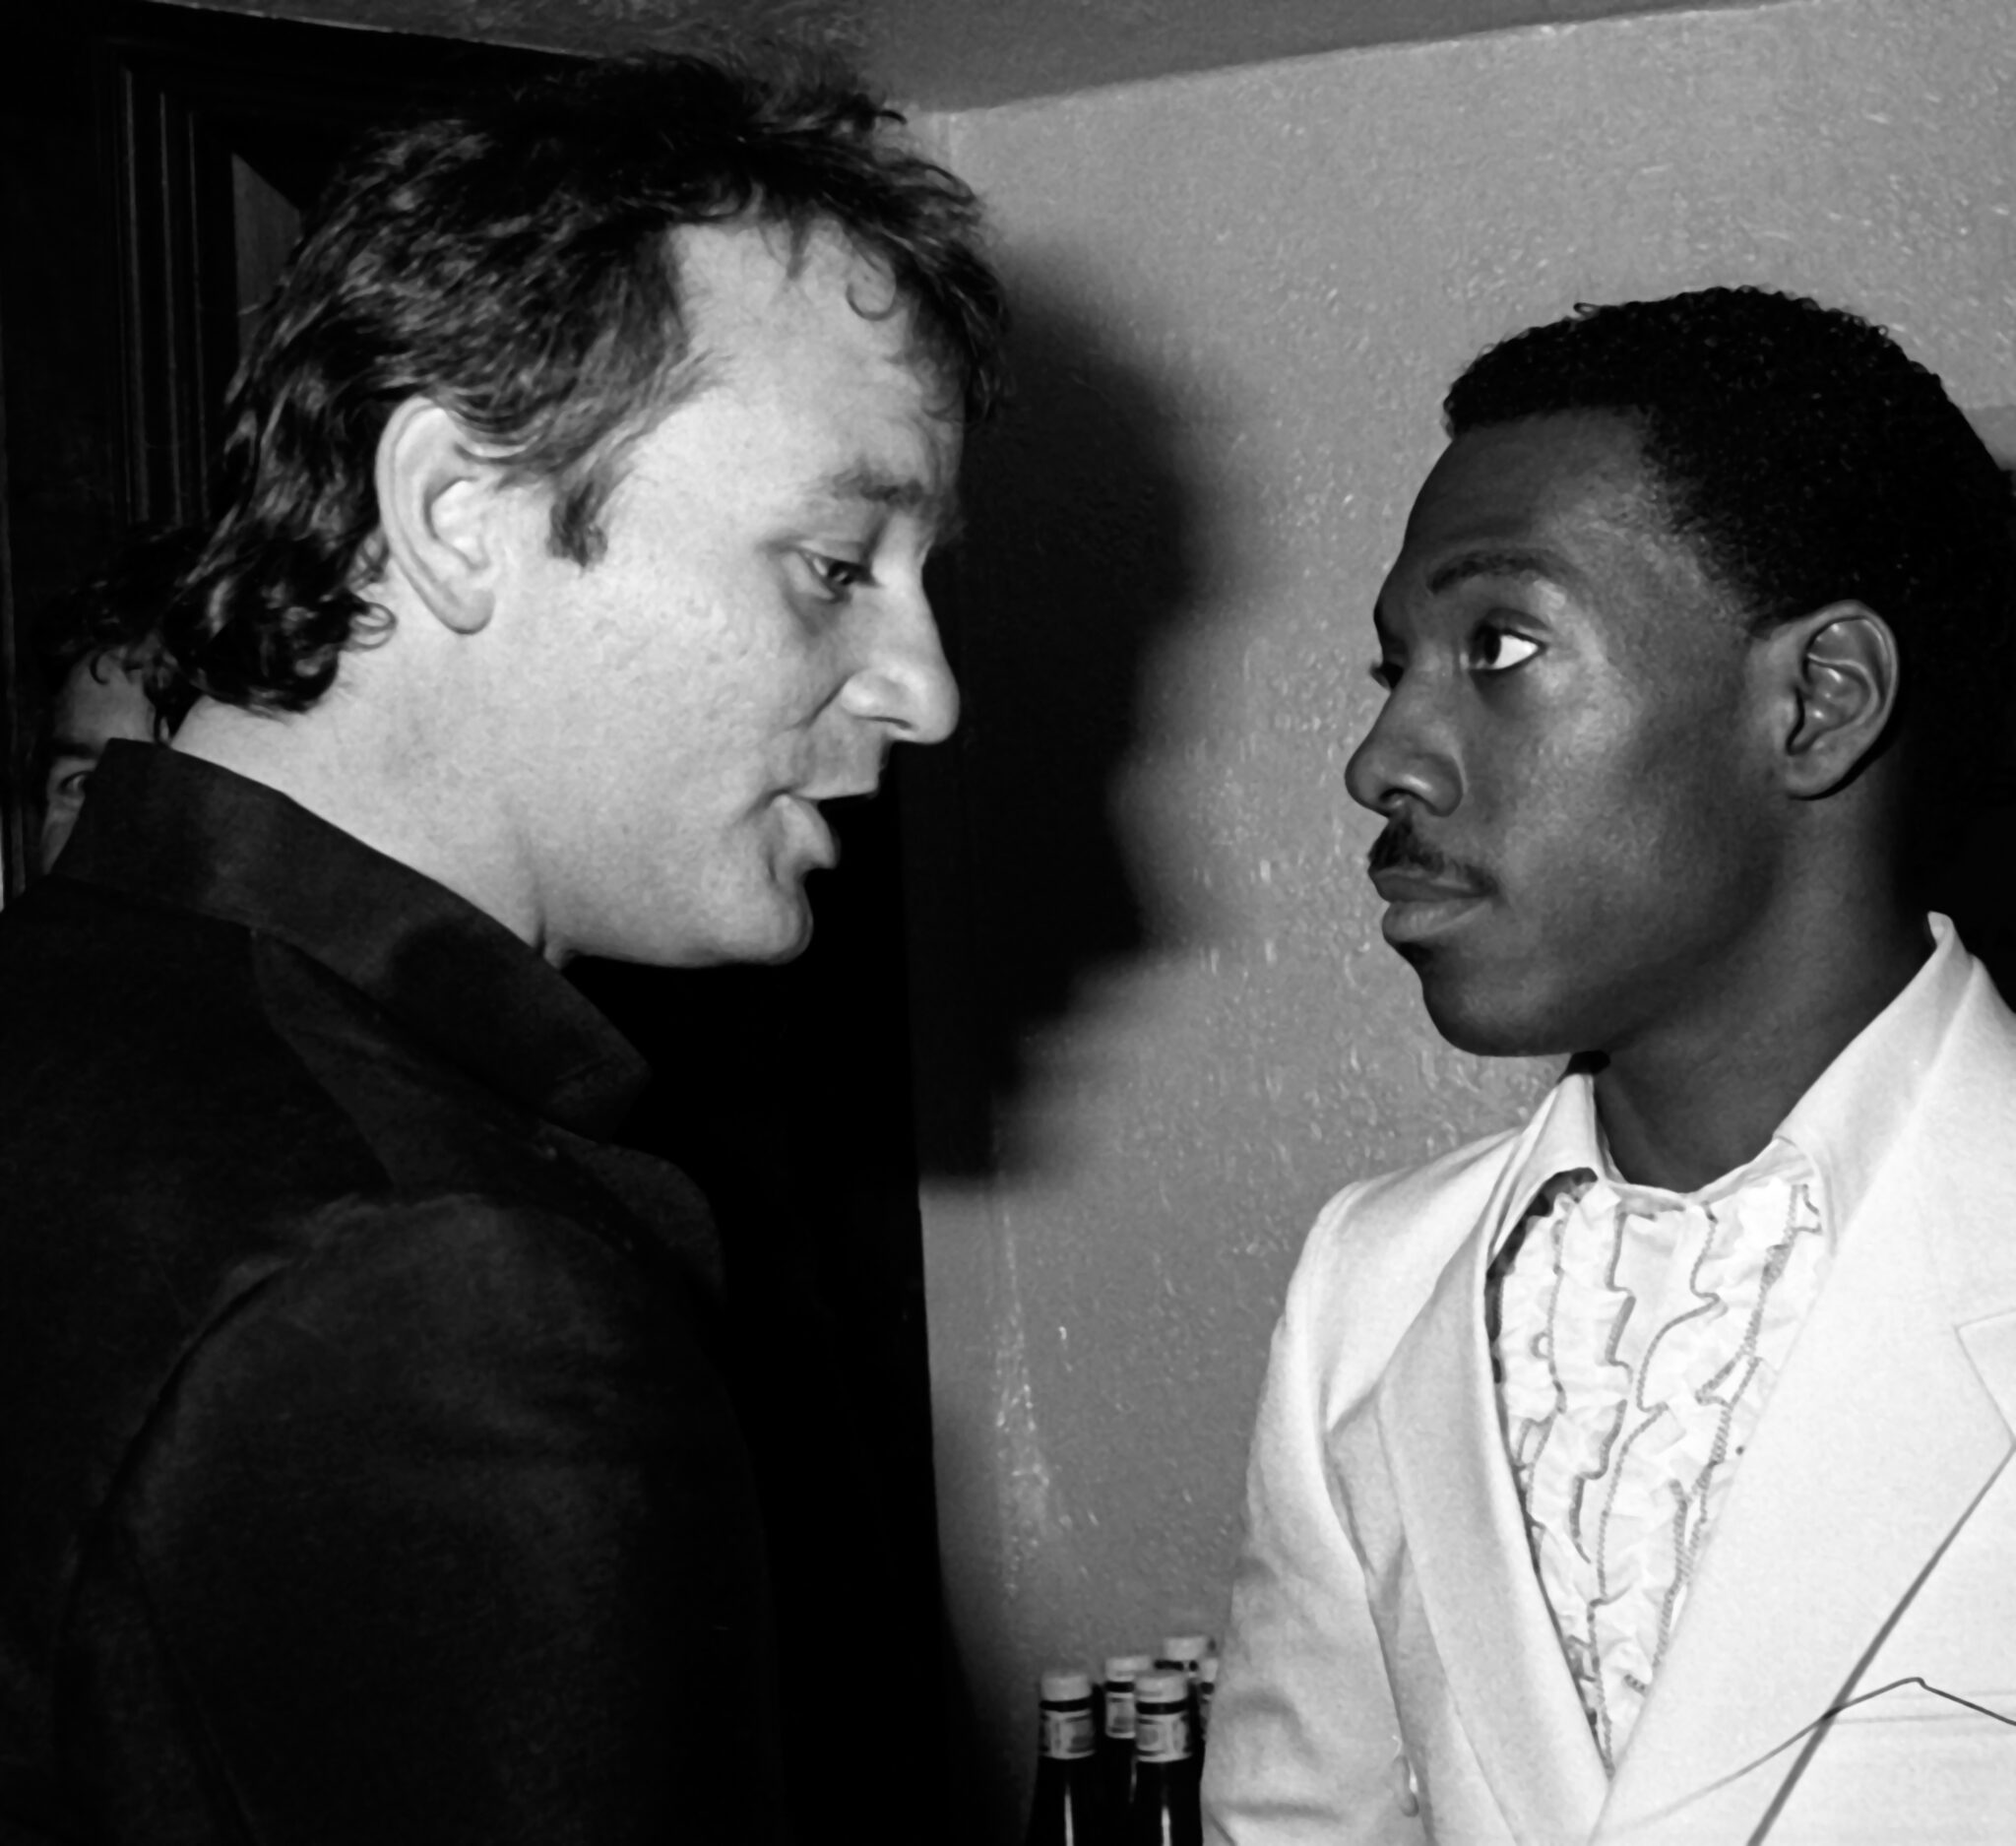 ‘I Don’t Wanna Be the Boy Wonder to Anybody’: Eddie Murphy Almost Landed Comedic Role as Batman, But Bill Murray Refused to Play Robin